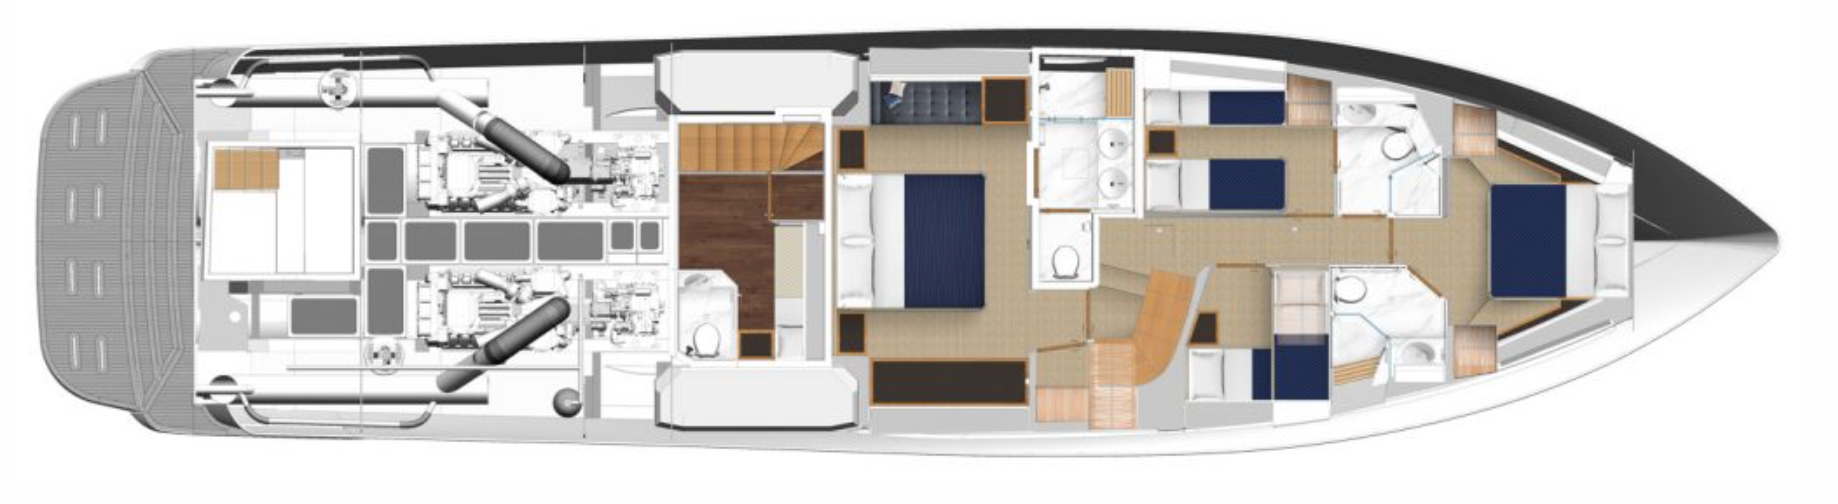 Riviera 78 accommodations, cabins, staterooms